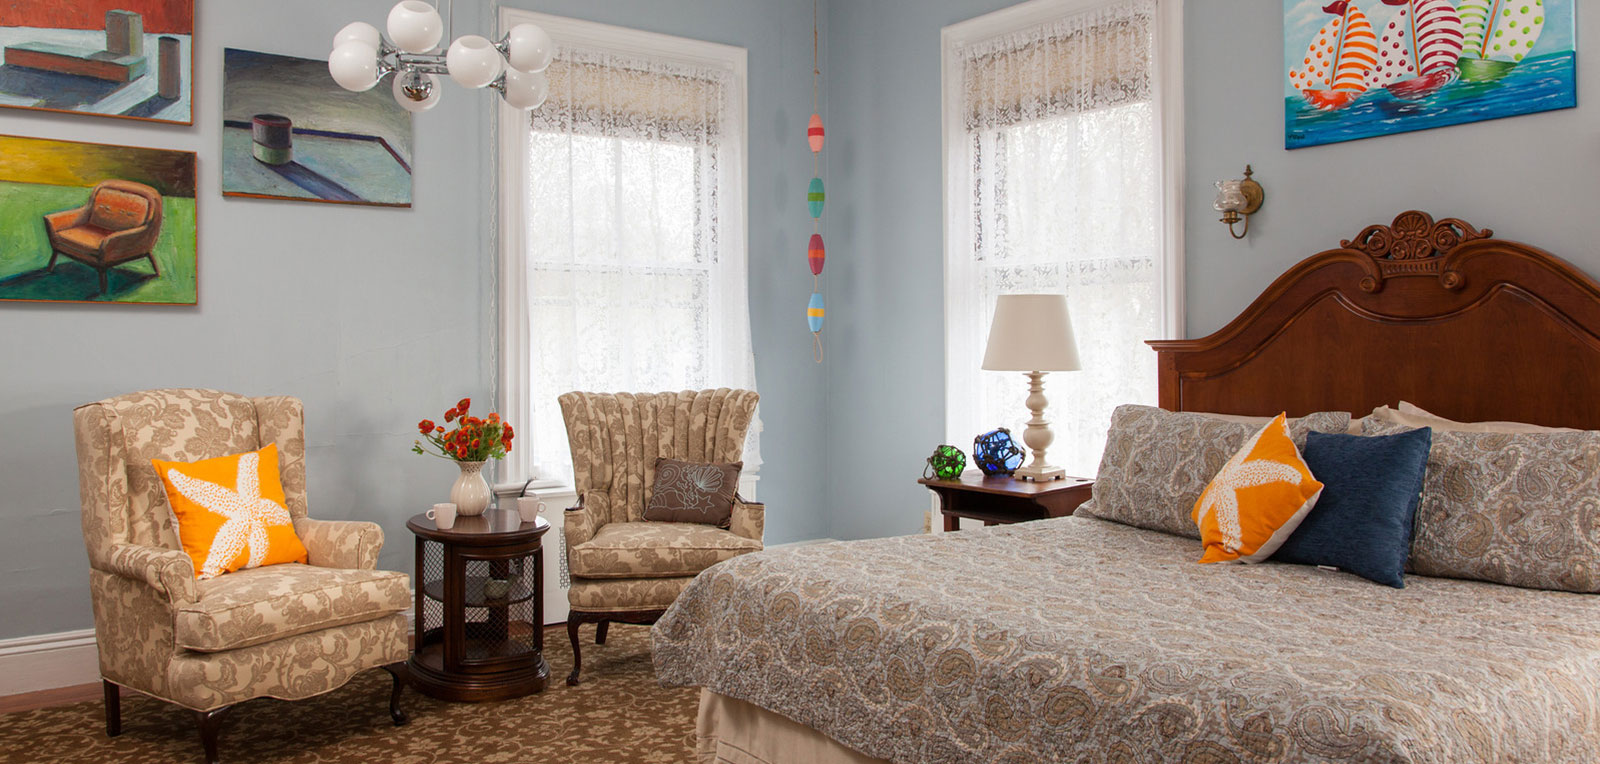 King Private Bath Bedroom Room with Paintings | ADMIRAL SIMS B&B, Newport Rhode Island